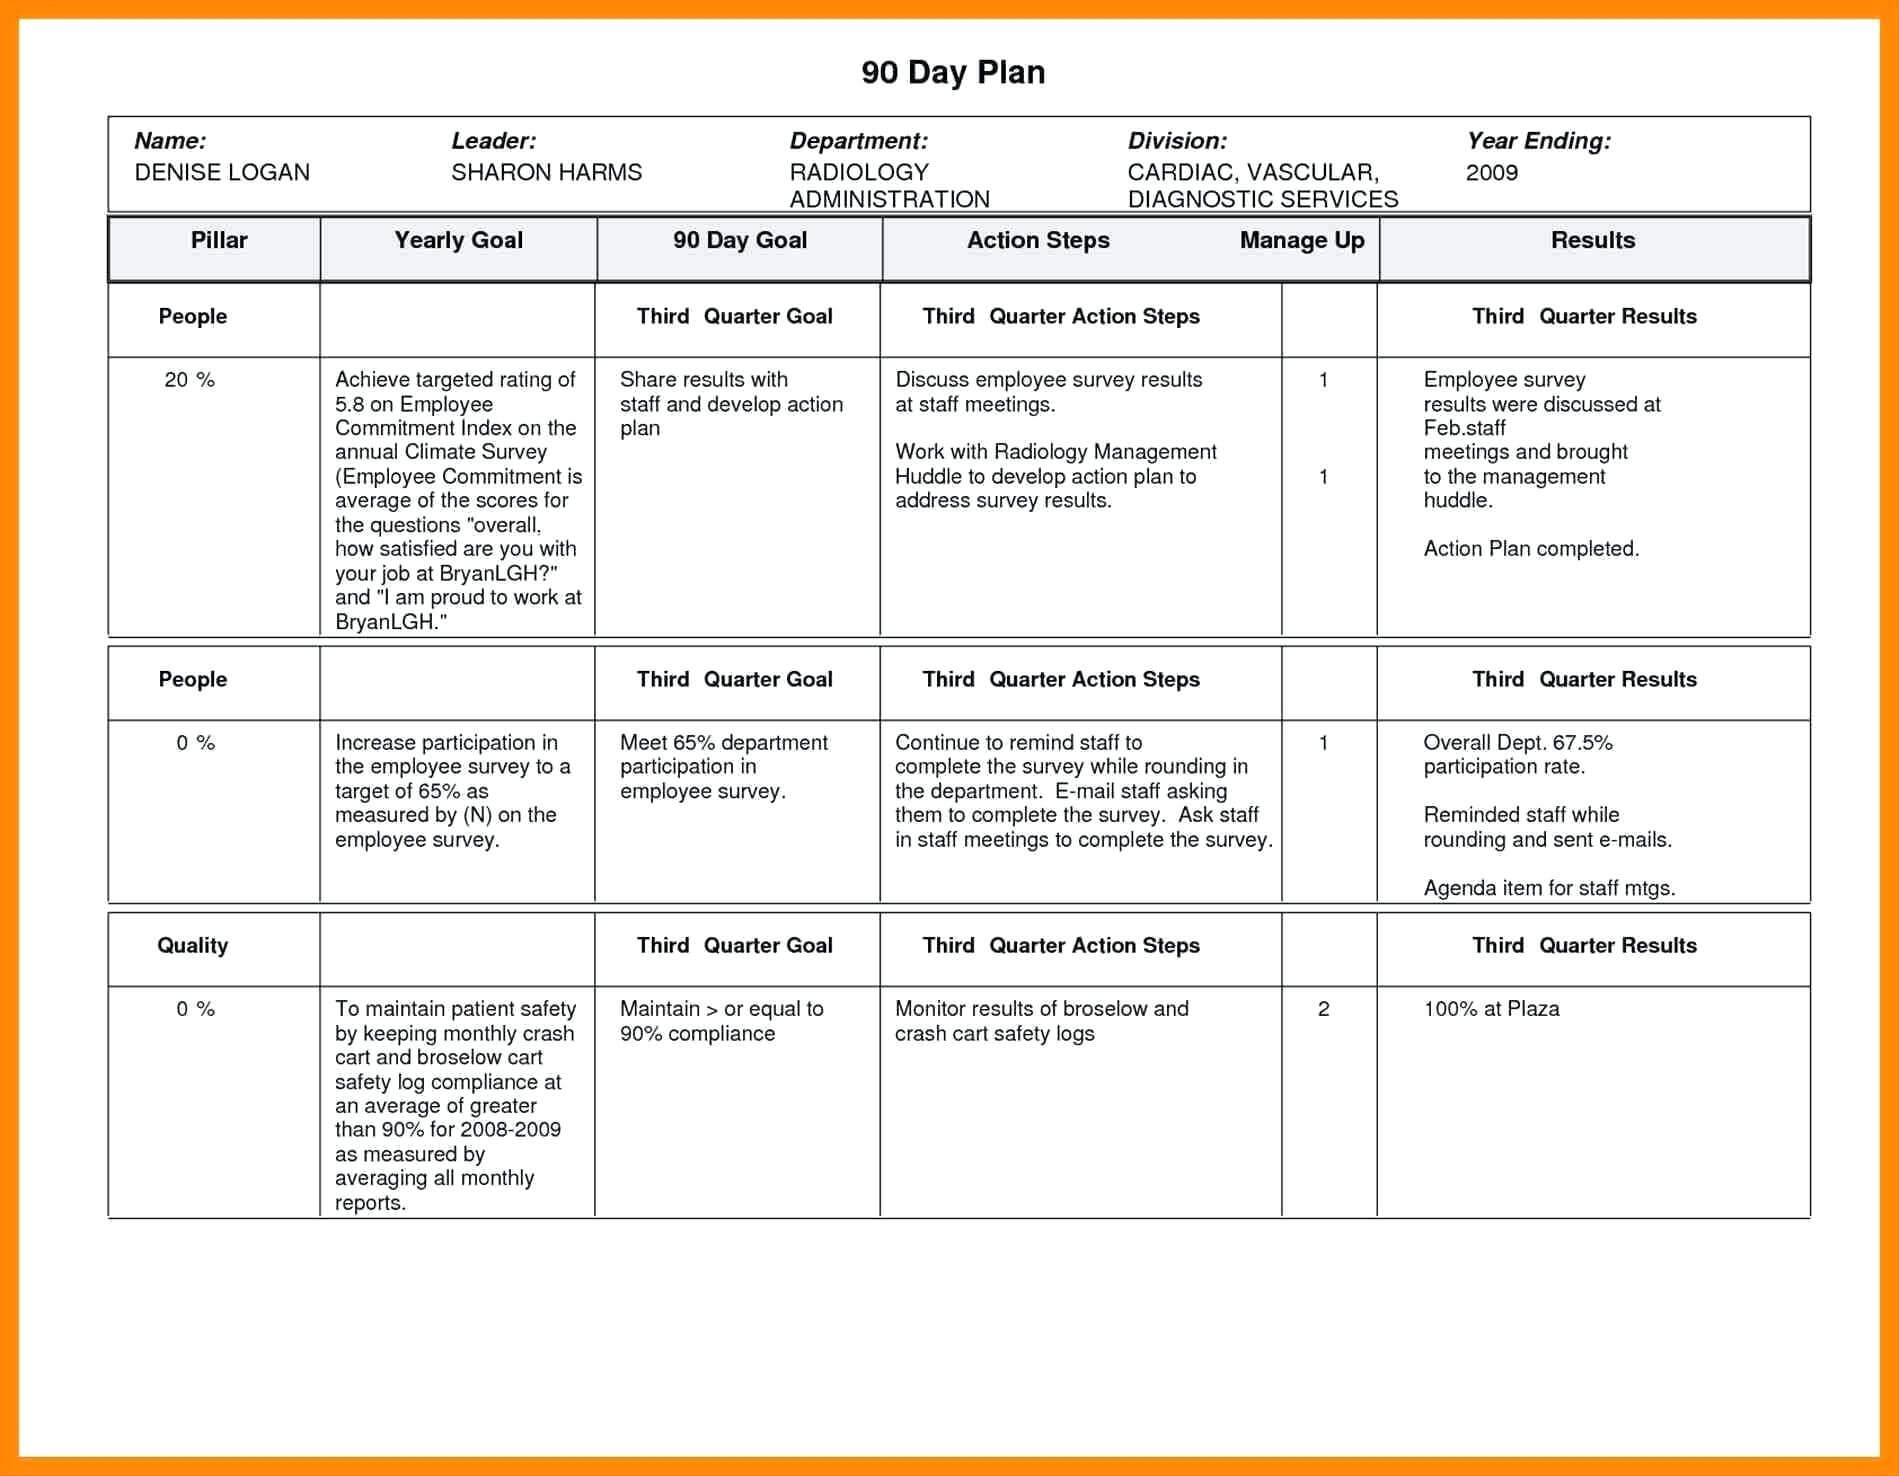 work plan sample for business